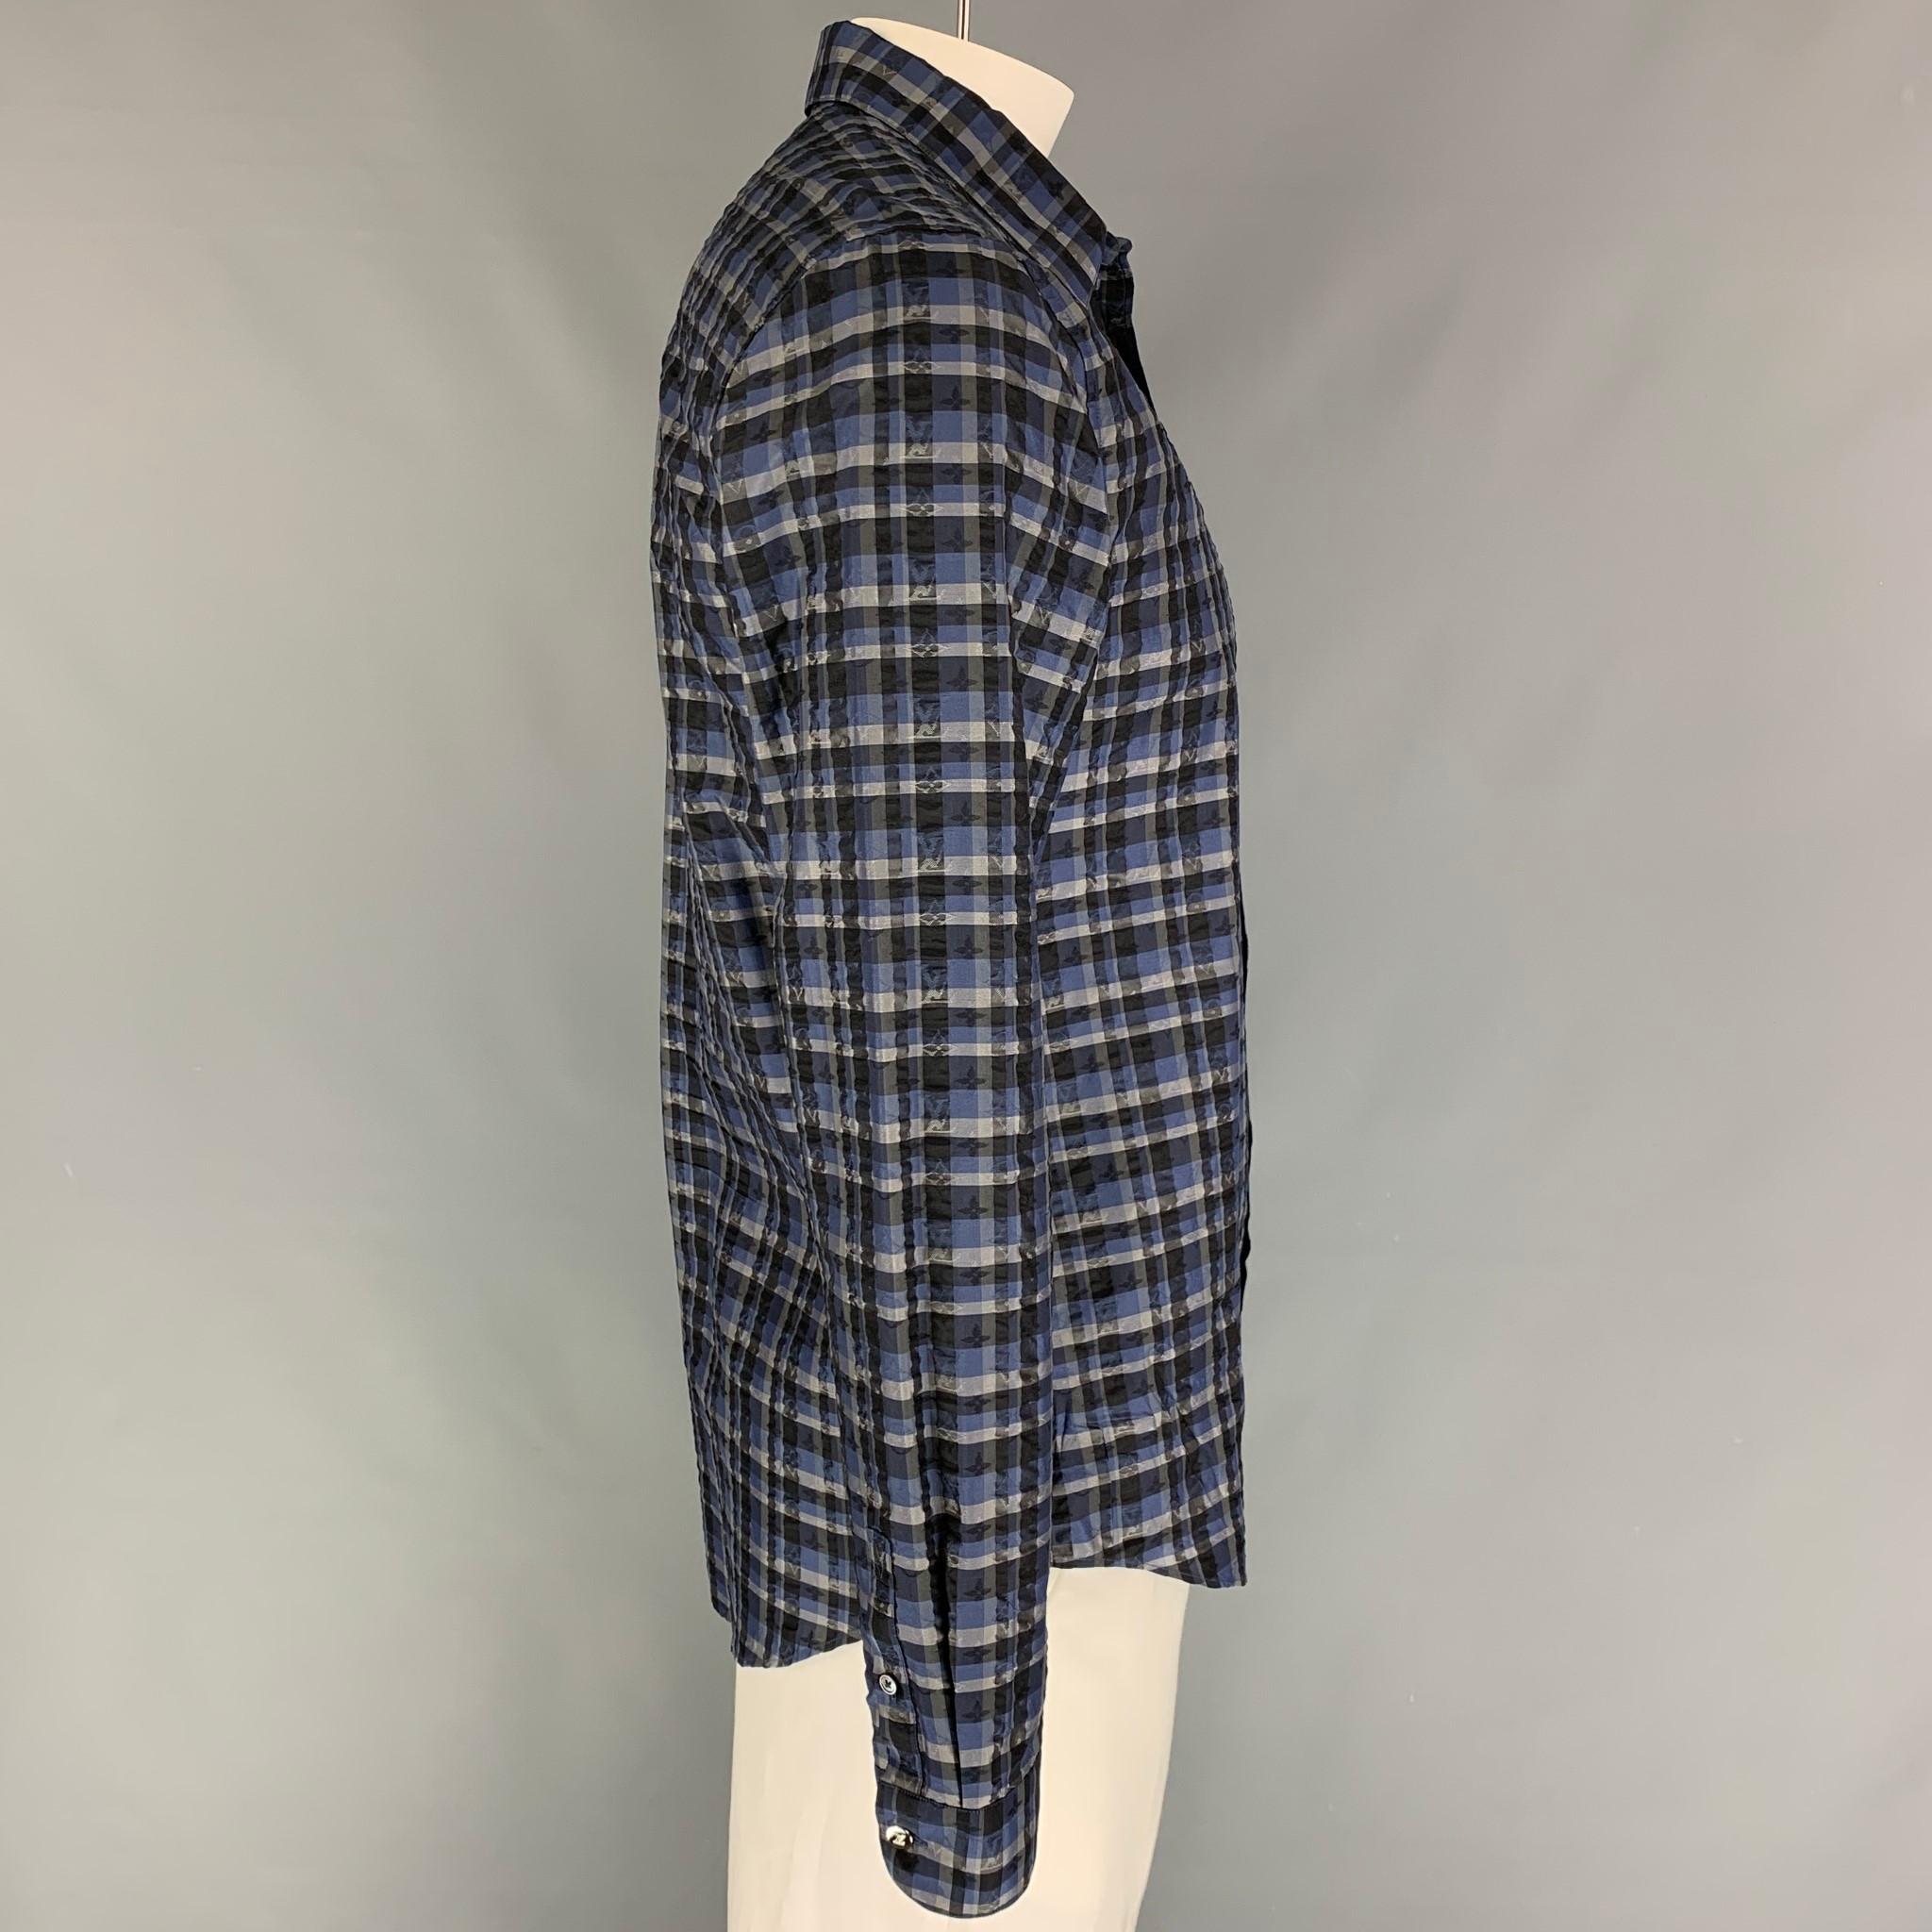 LOUIS VUITTON long sleeve shirt comes in a blue & black plaid silk featuring a spread collar and a button up closure. Made in Italy. 

Excellent Pre-Owned Condition.
Marked: XL / 9

Measurements:

Shoulder: 18 in.
Chest: 42 in.
Sleeve: 27.5